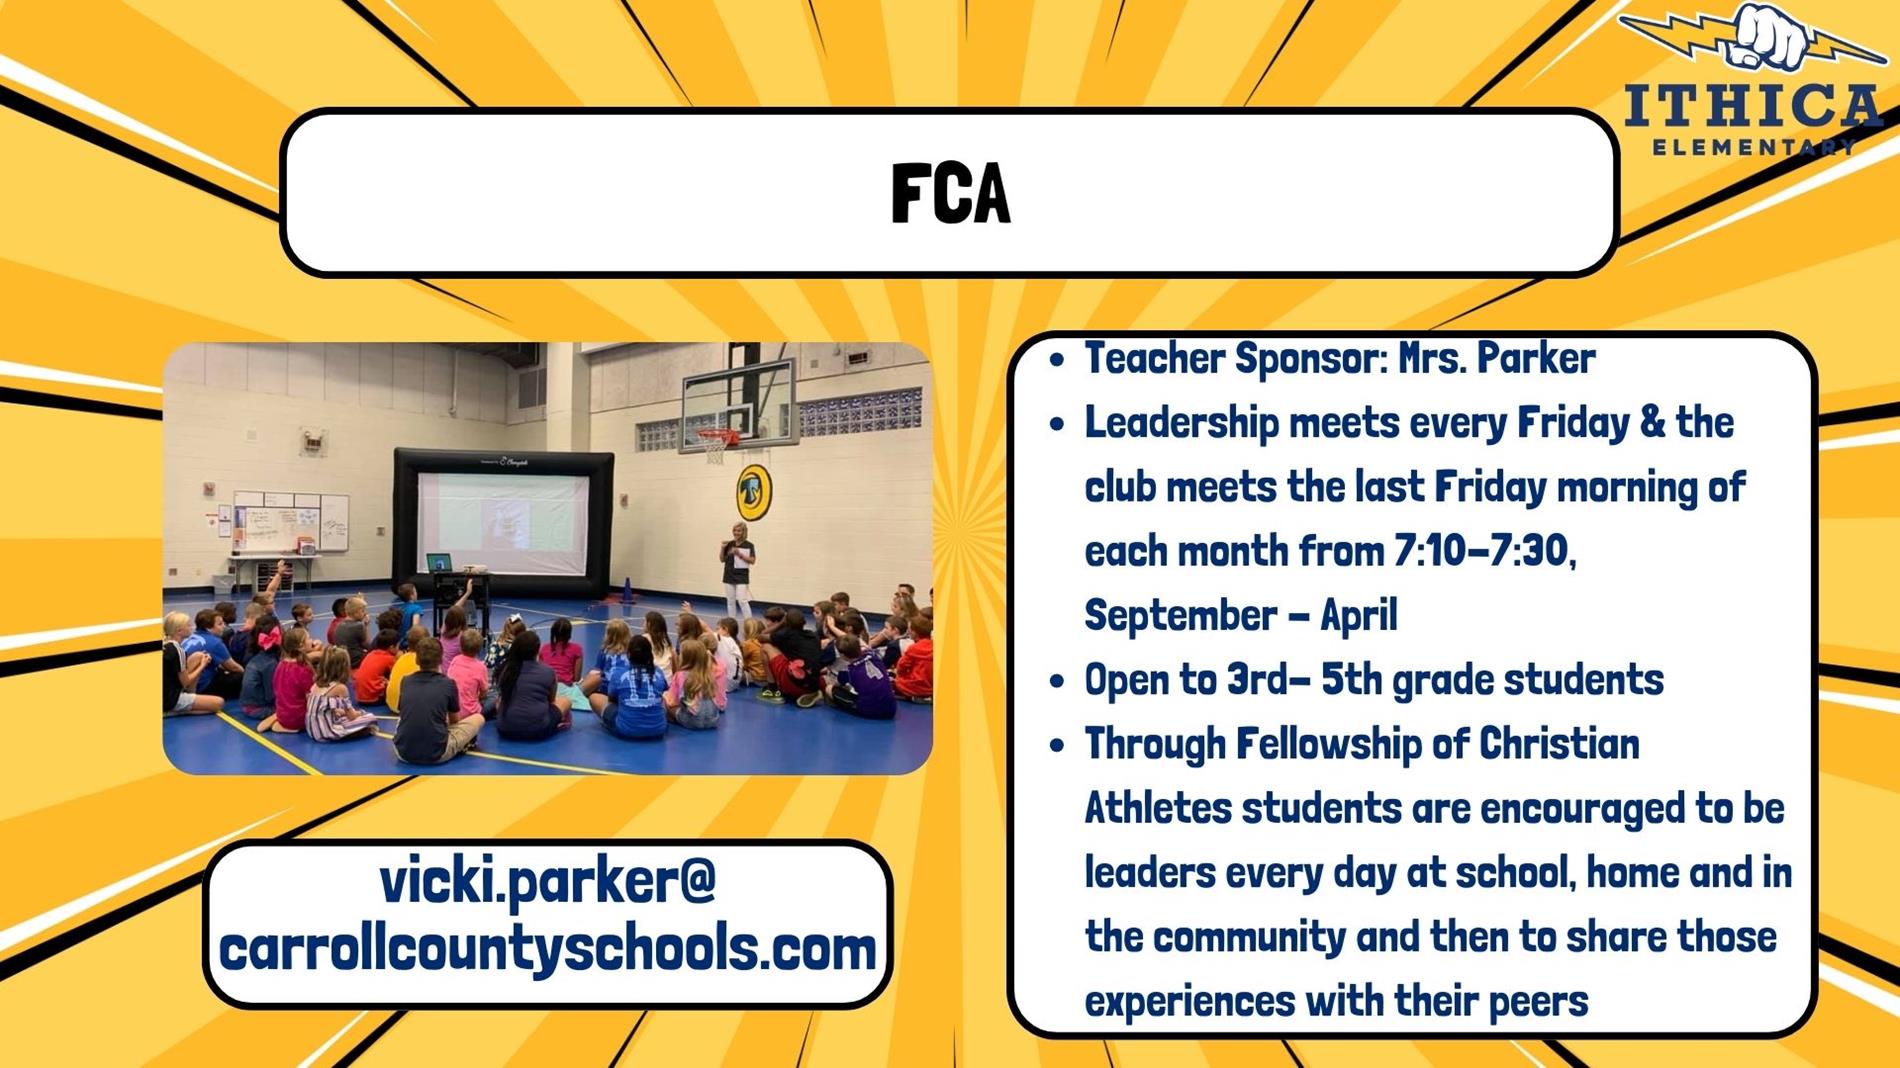 information about fca